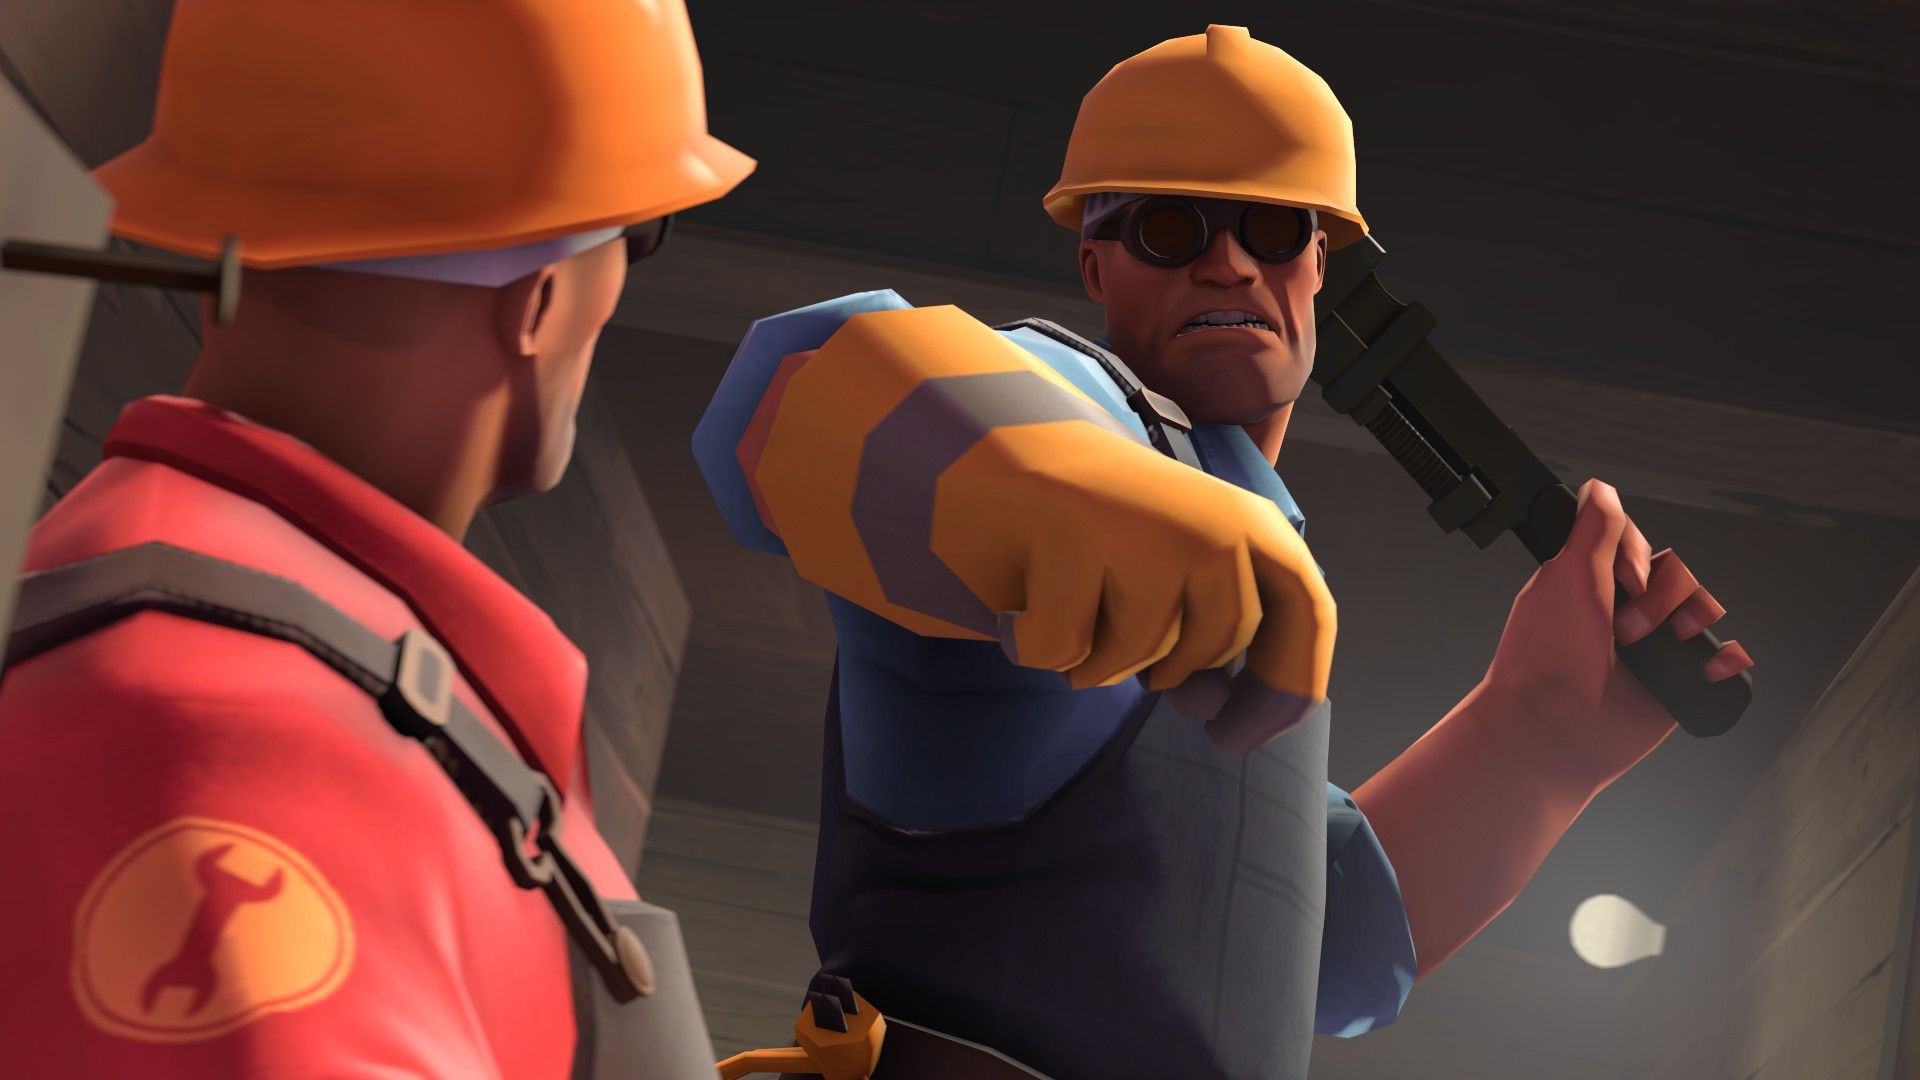 Video games engineer tf2 team fortress 2 wallpaper. Team fortress Team fortress, Team fortress 2 engineer